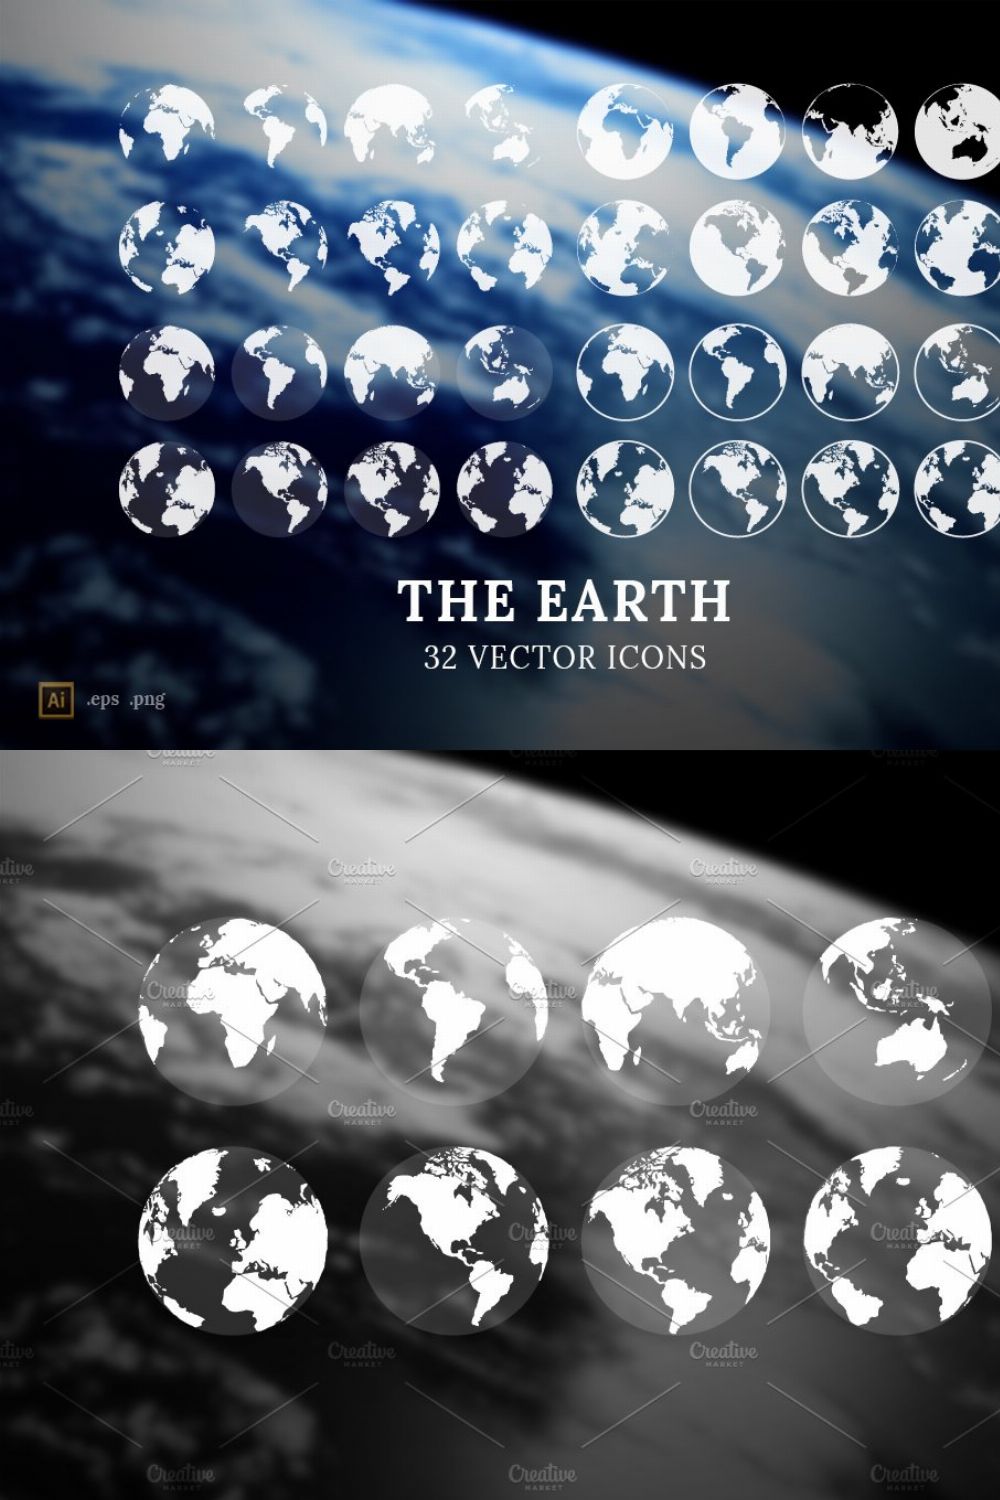 The Earth - 32 vector icons pinterest preview image.